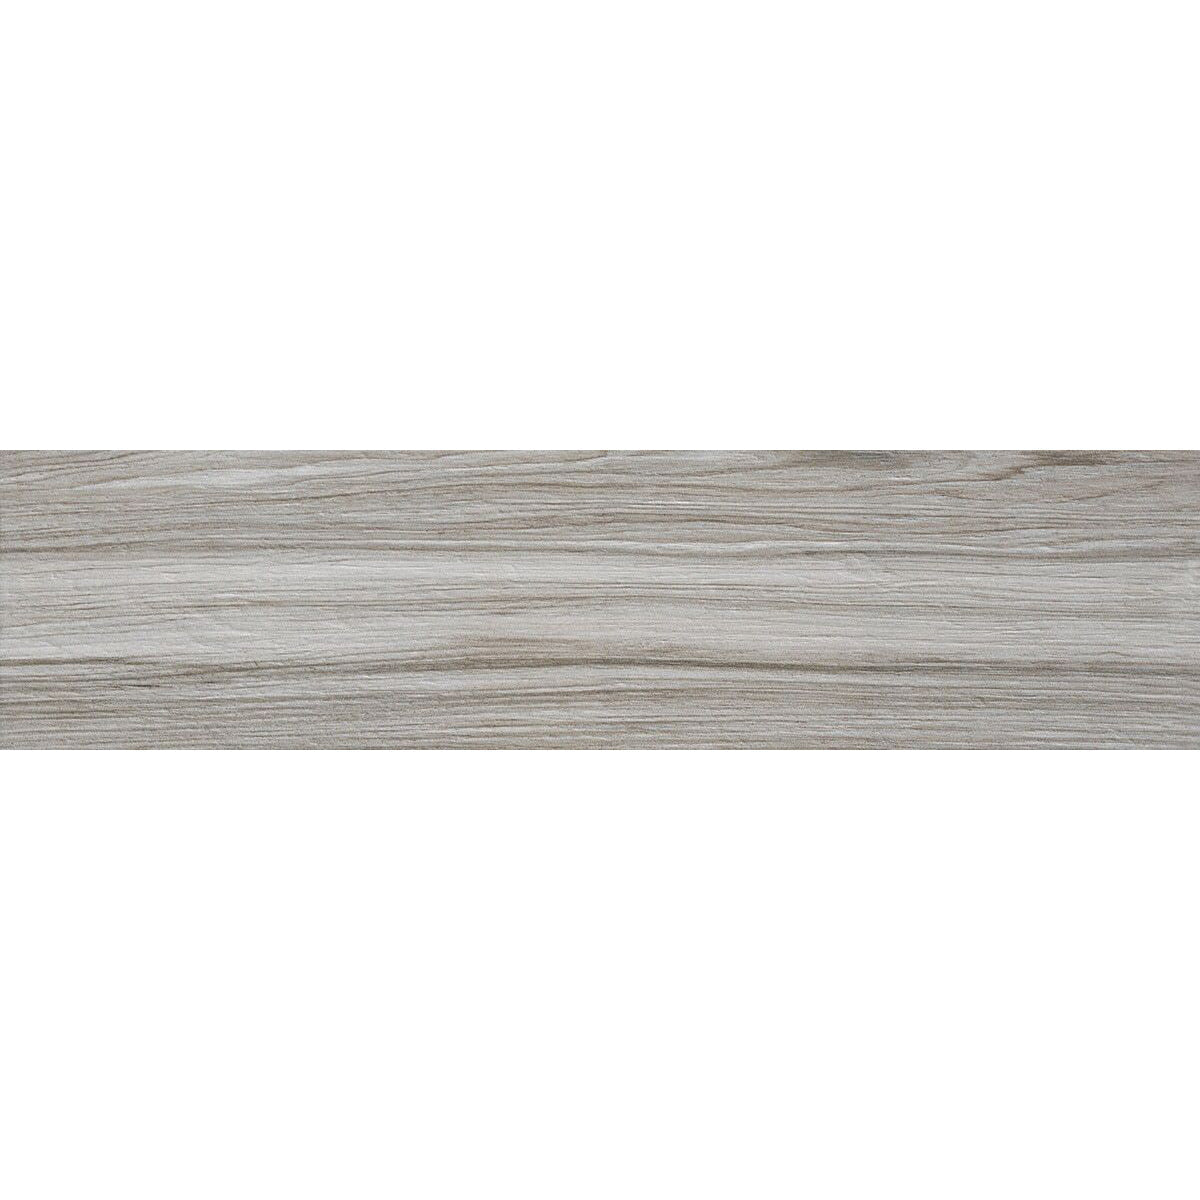 Marazzi - Knoxwood Glazed 6 in. x 24 in. Porcelain Tile - Caraway